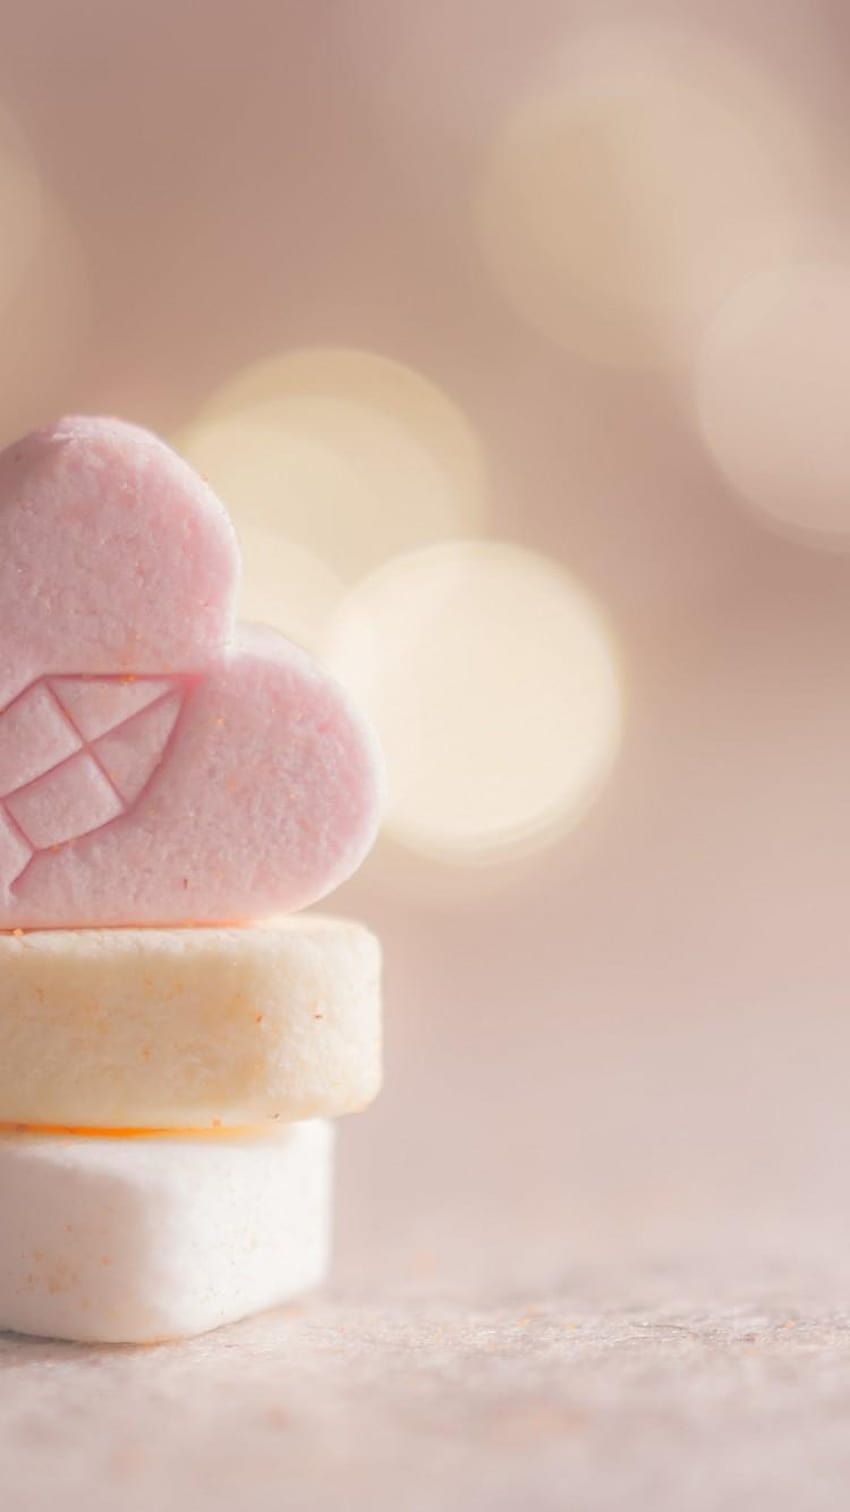 A pile of heart-shaped candy on a table - Marshmallows